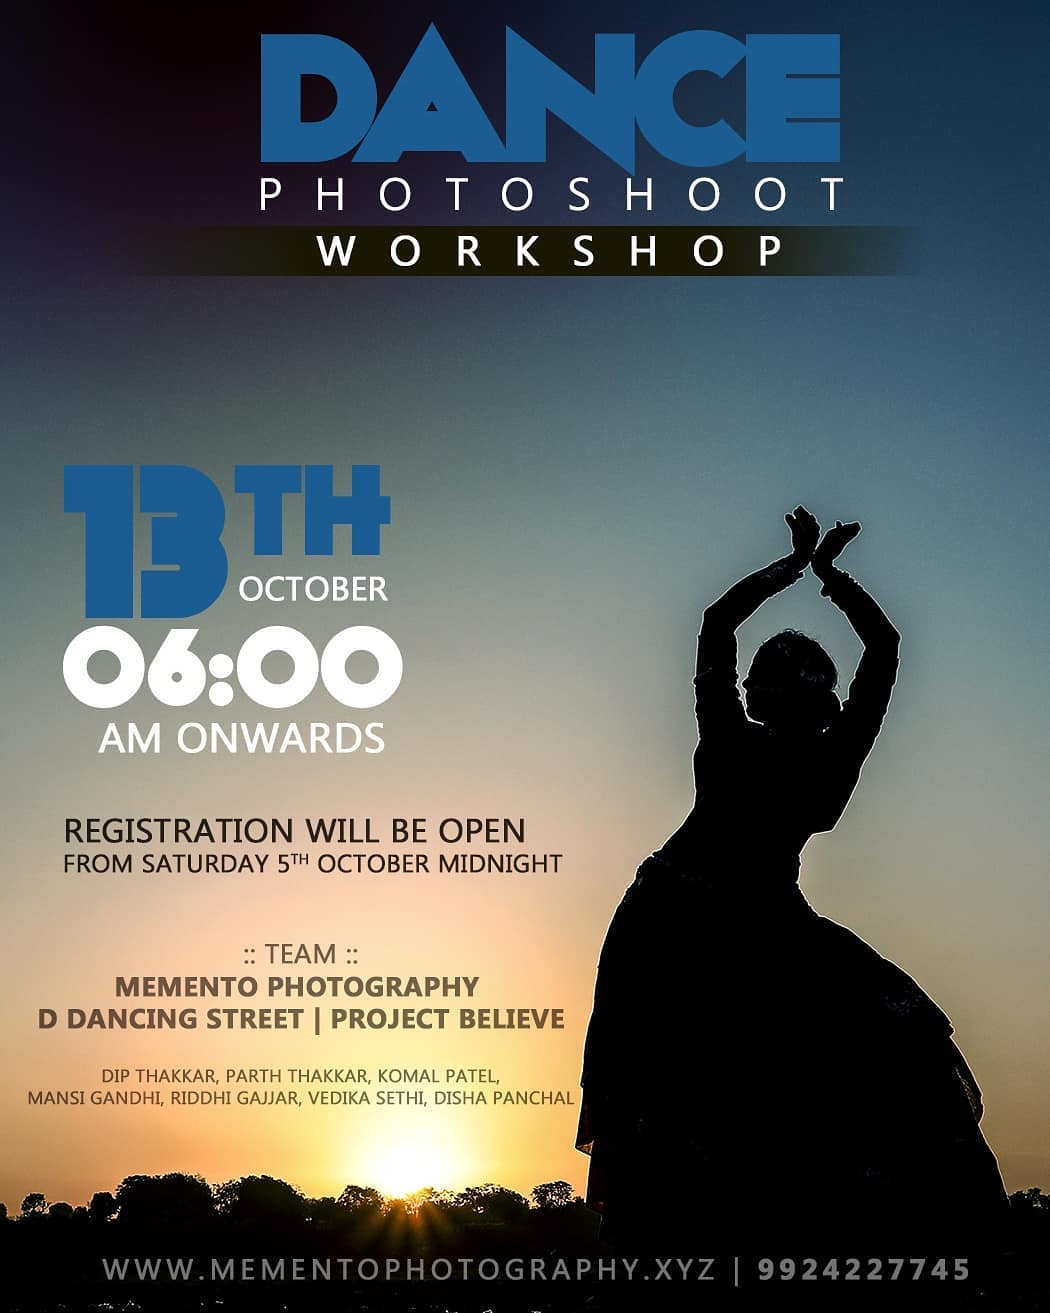 Hello Artists,

Dance Photography Workshop.

Workshop date 13th oct, 
Time 6.00am - 11.00am.

Registration will be open from Saturday Midnight(5th Oct).
( via Google form link)

Charges will be mentioned in the upcoming  poster for particular date.

100% Prior to workshop meetup.

Thank you
Team : Mememto Photography | D Dancing Street | Project Believe

Contact 9924227745 for any queries.

#dancephotographer #dancephotographyworkshop
#ahmedabad #amdavadi #amdavad
#dancephotography #dancers #photographer #dancephoto #workshop #9924227745 #dipmementophotography #ddancingstreet #projectbelieve #streetshoot  #streetconceptshoot #conceptshoot #conceptphotoshoot #ahmedabad #exploreahmedabad
#dslrofficial  #dance #photooftheday  #dancerslife  #bestoftheday #danceshoot 
#indiaportraits #indiaphotoproject #conceptworkshop #keepdancing